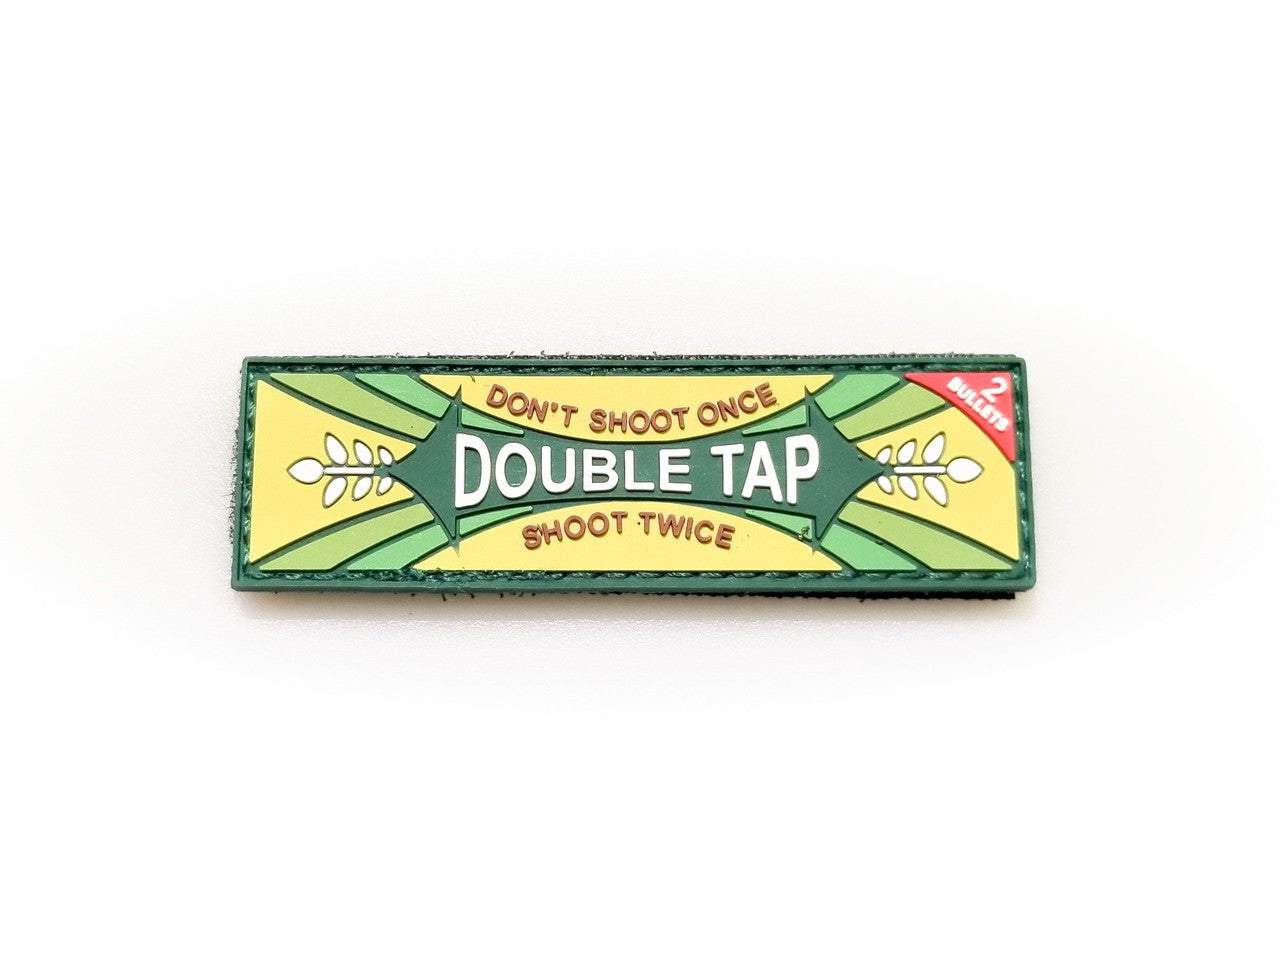 TIC Patch - DOUBLE TAP